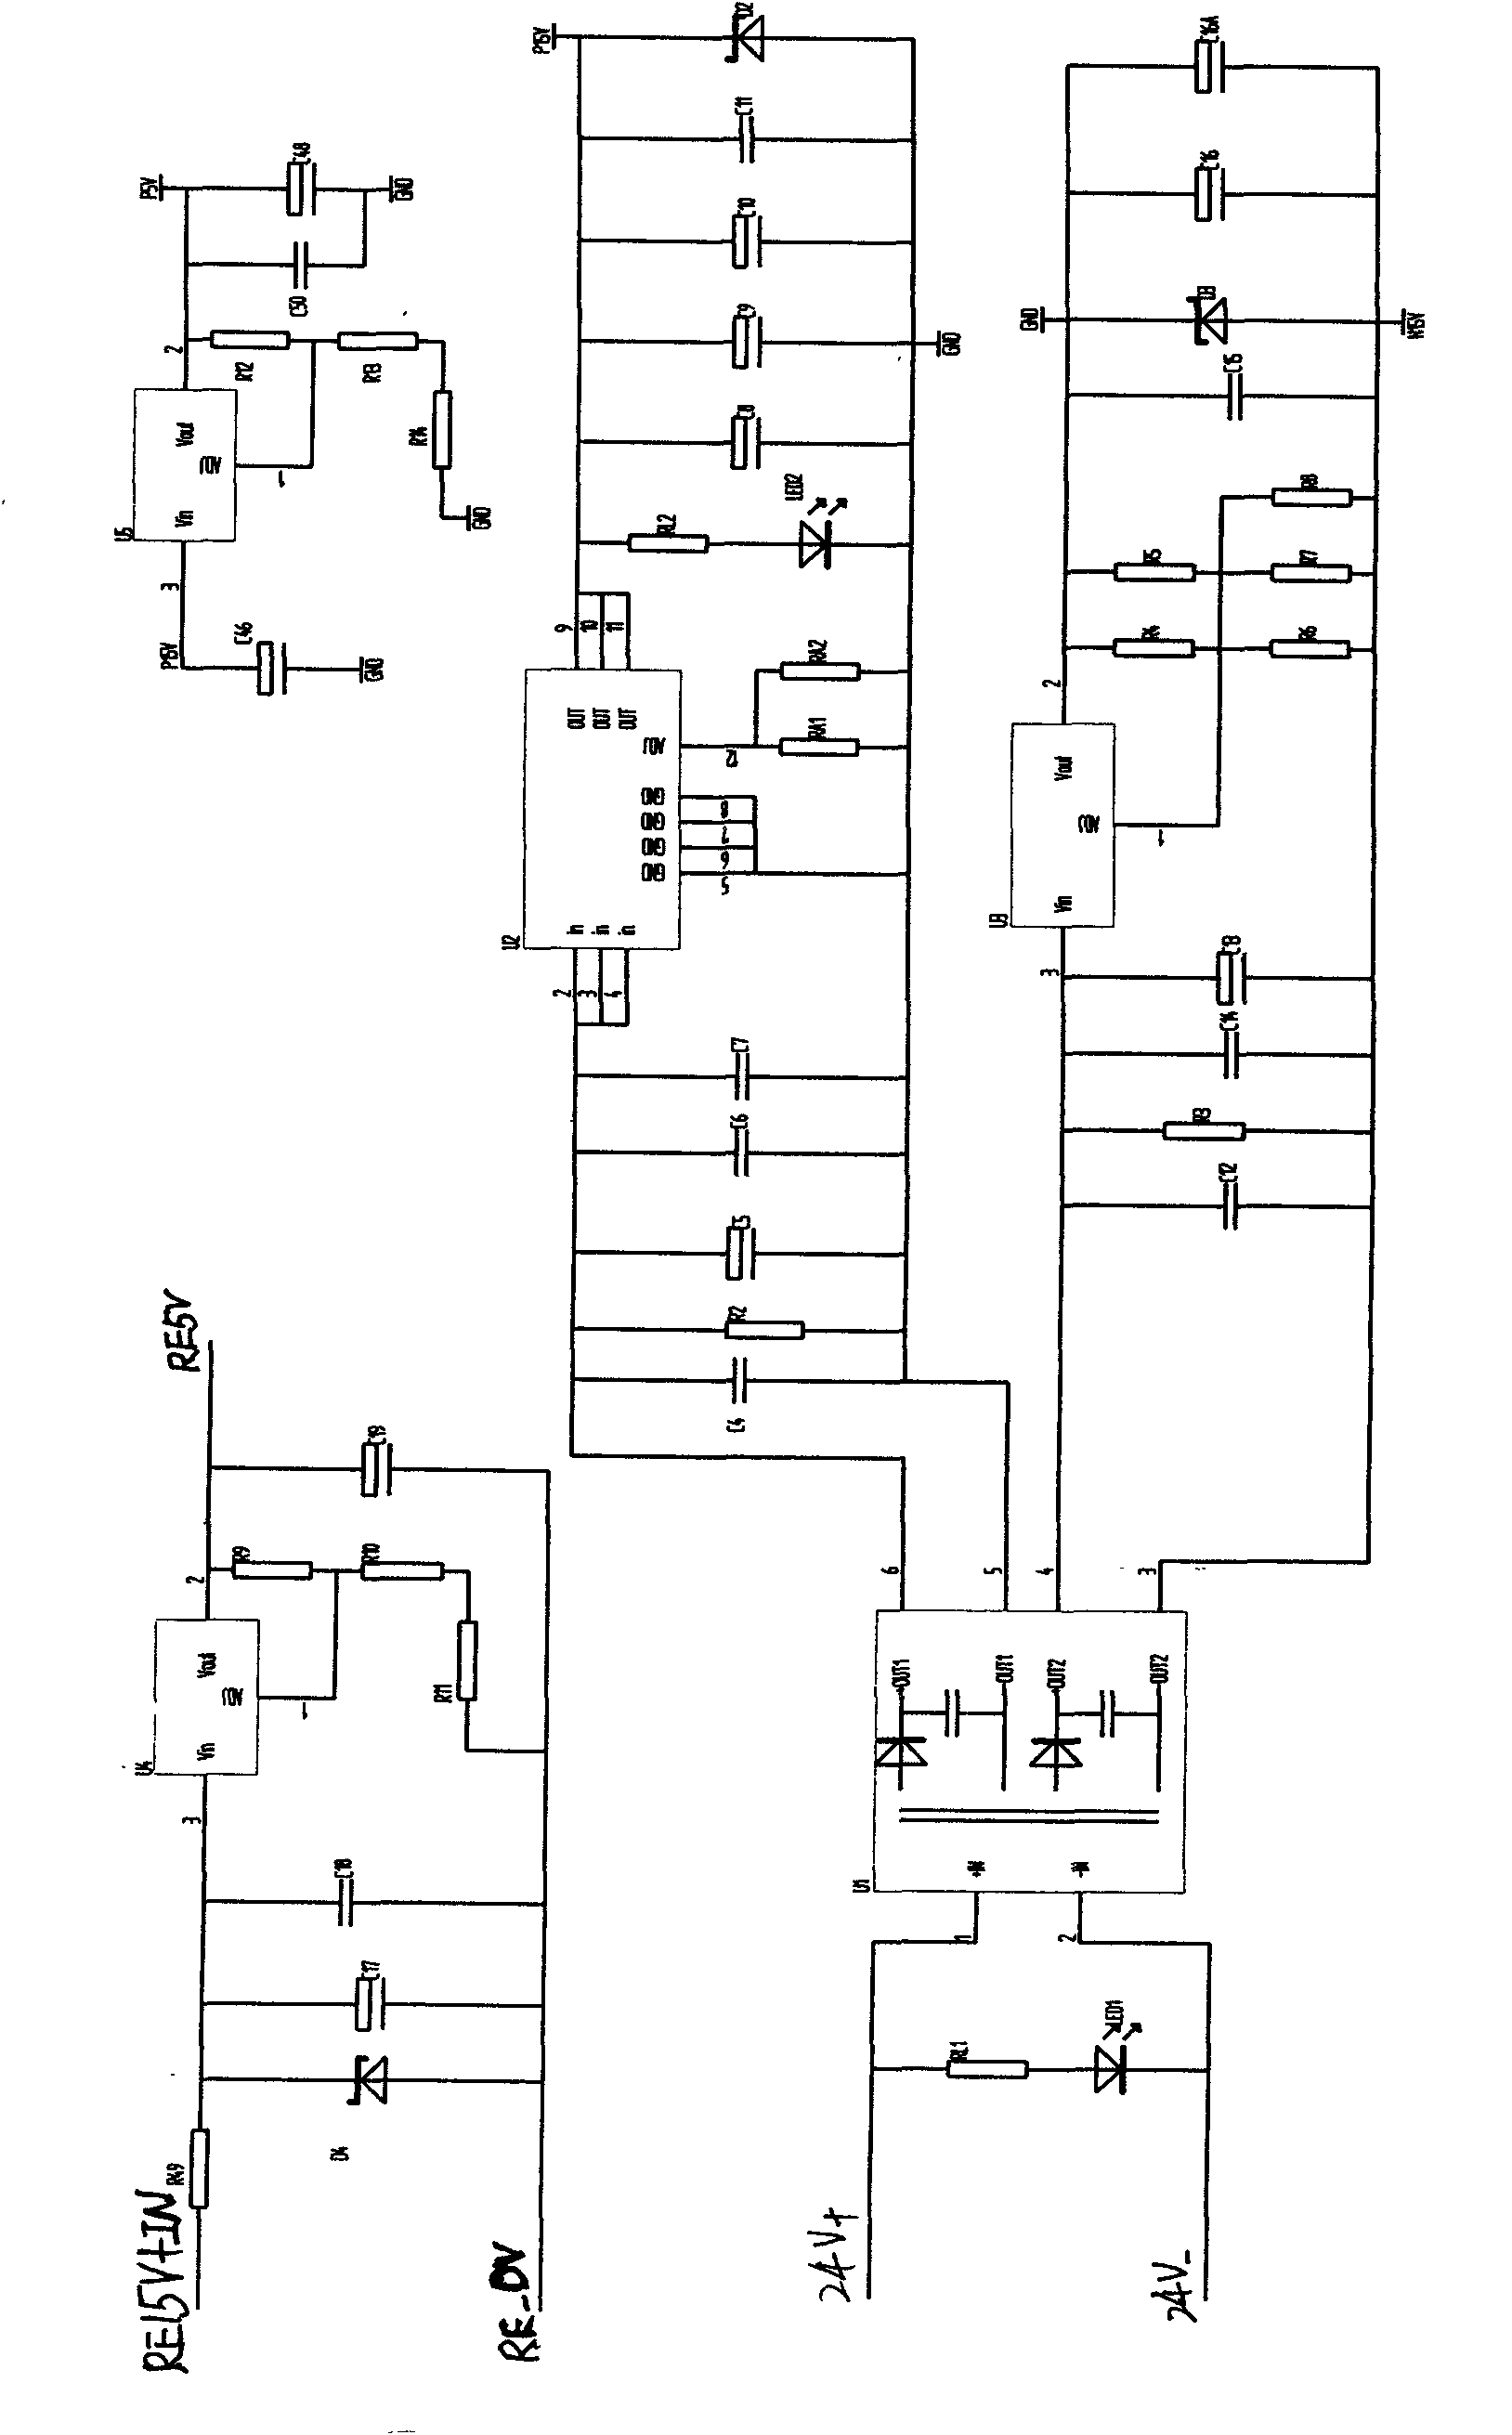 Driving circuit of high-voltage current transformer